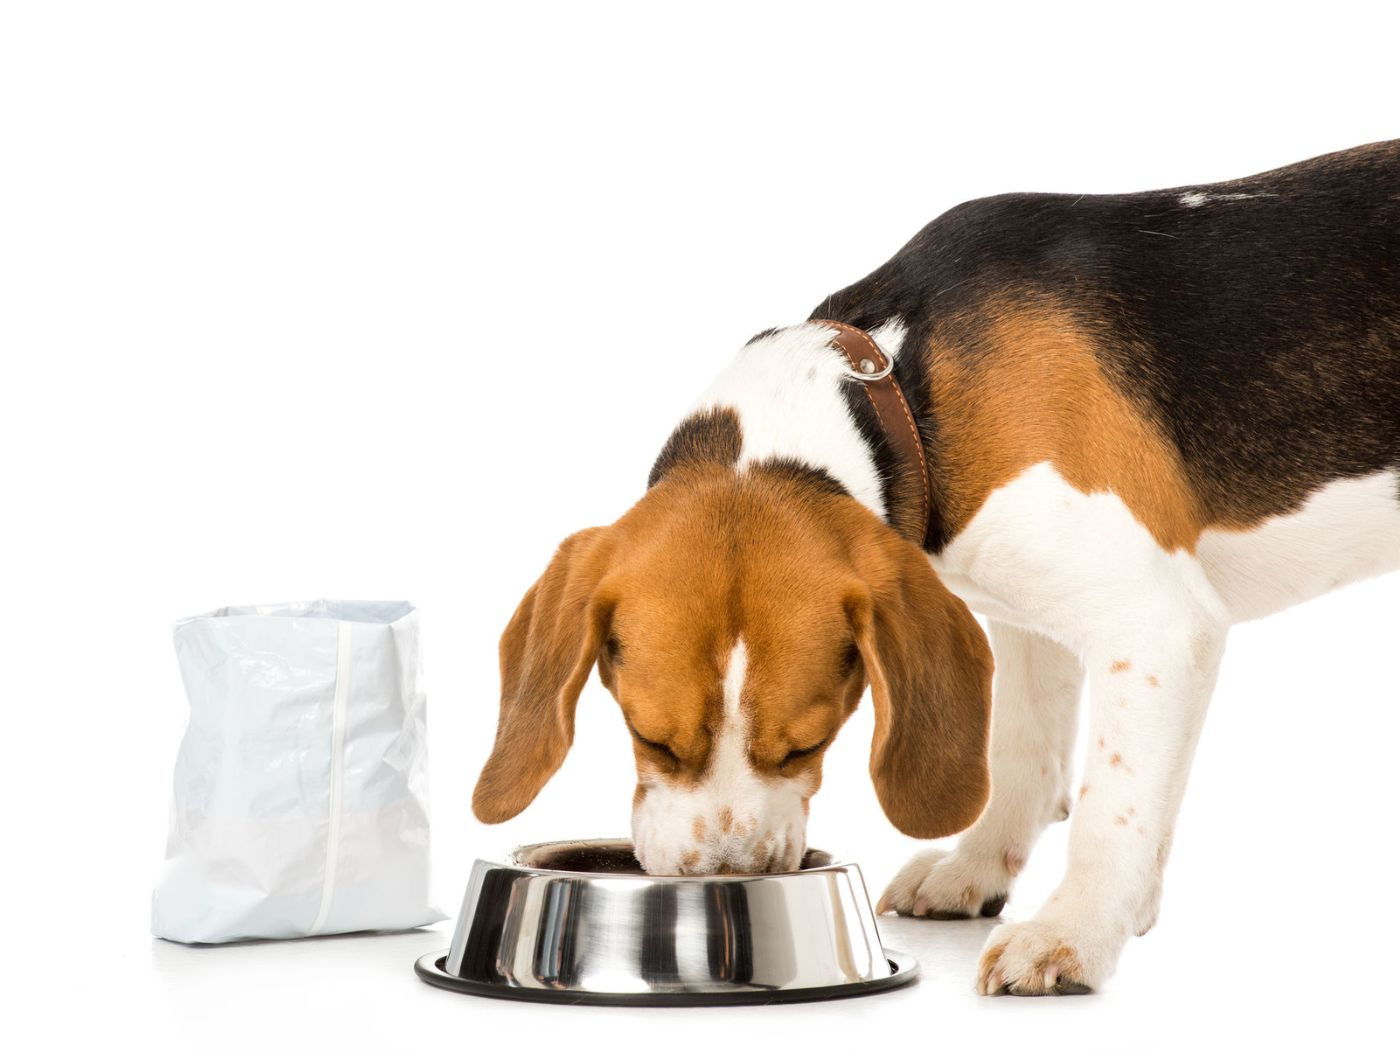 Beagle eating dog food that has been safely stored in original packaging